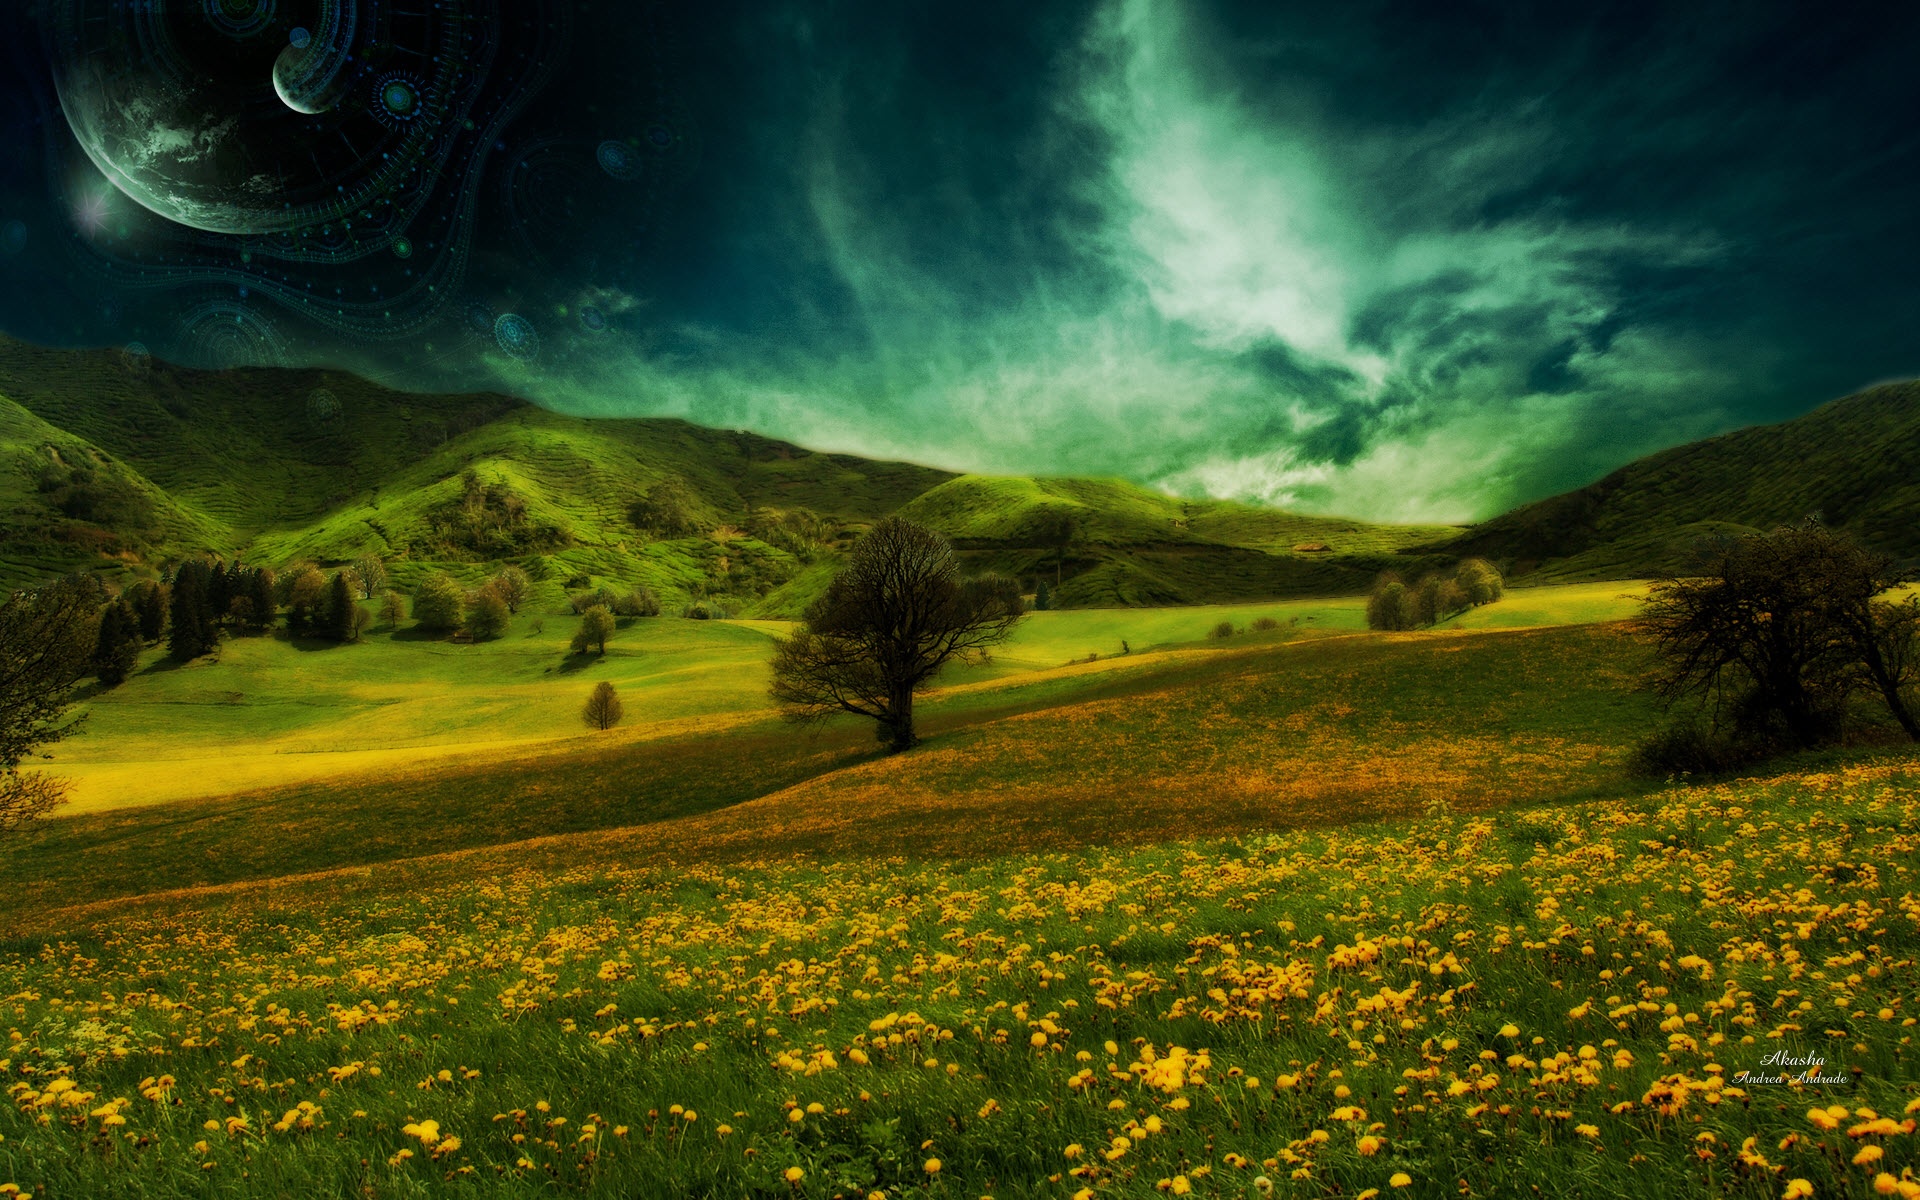 nature, Landscapes, Fields, Flowers, Hills, Plants, Trees, Sky, Clouds, Dream, Planets, Moon, Fantasy, Manipulation, Cg, Digital, Art, Photography Wallpaper